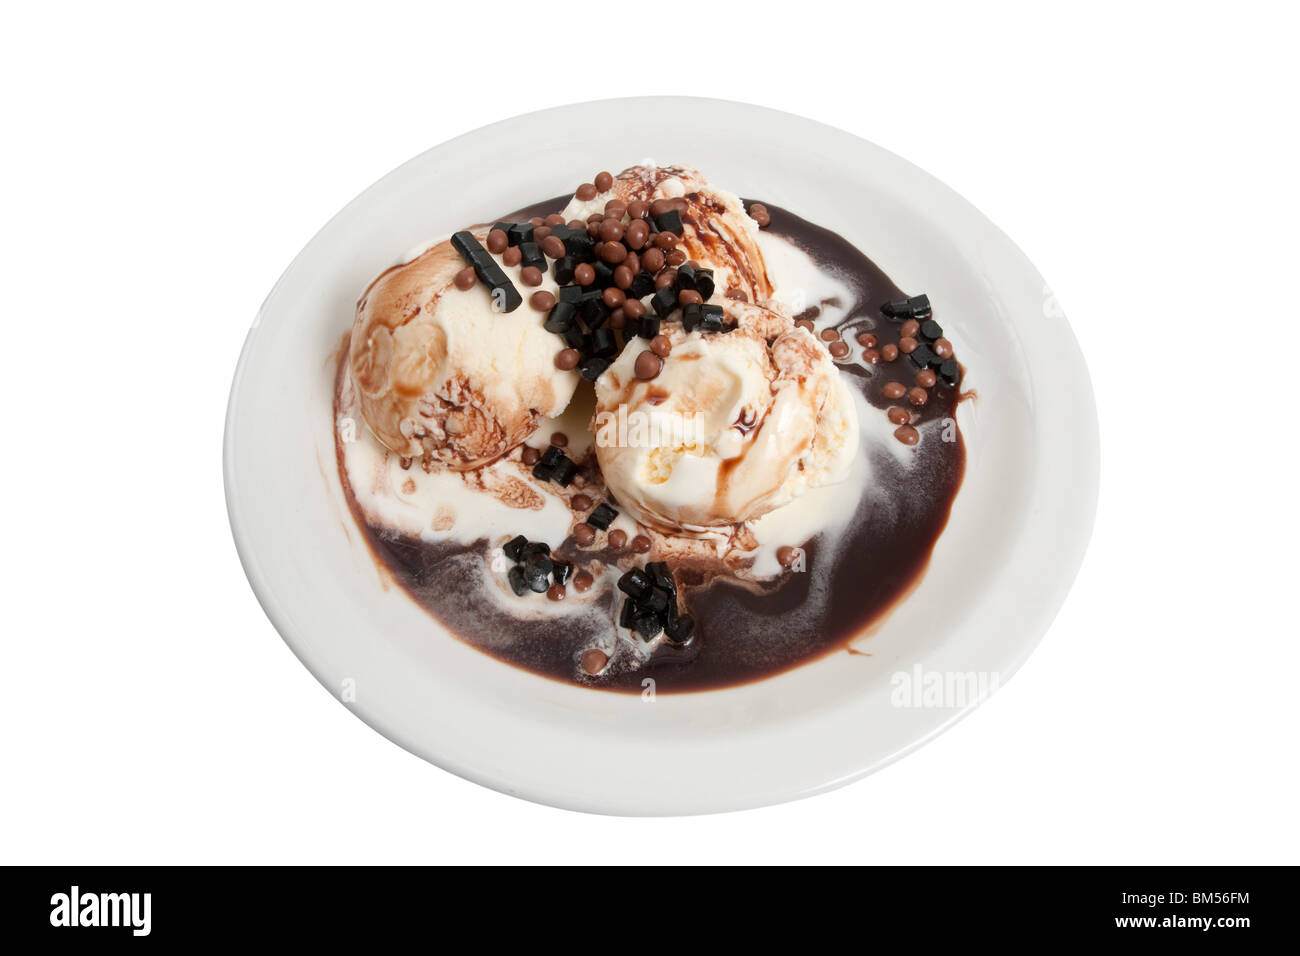 Ice cream dessert with chocolate sauce and candy topping Stock Photo